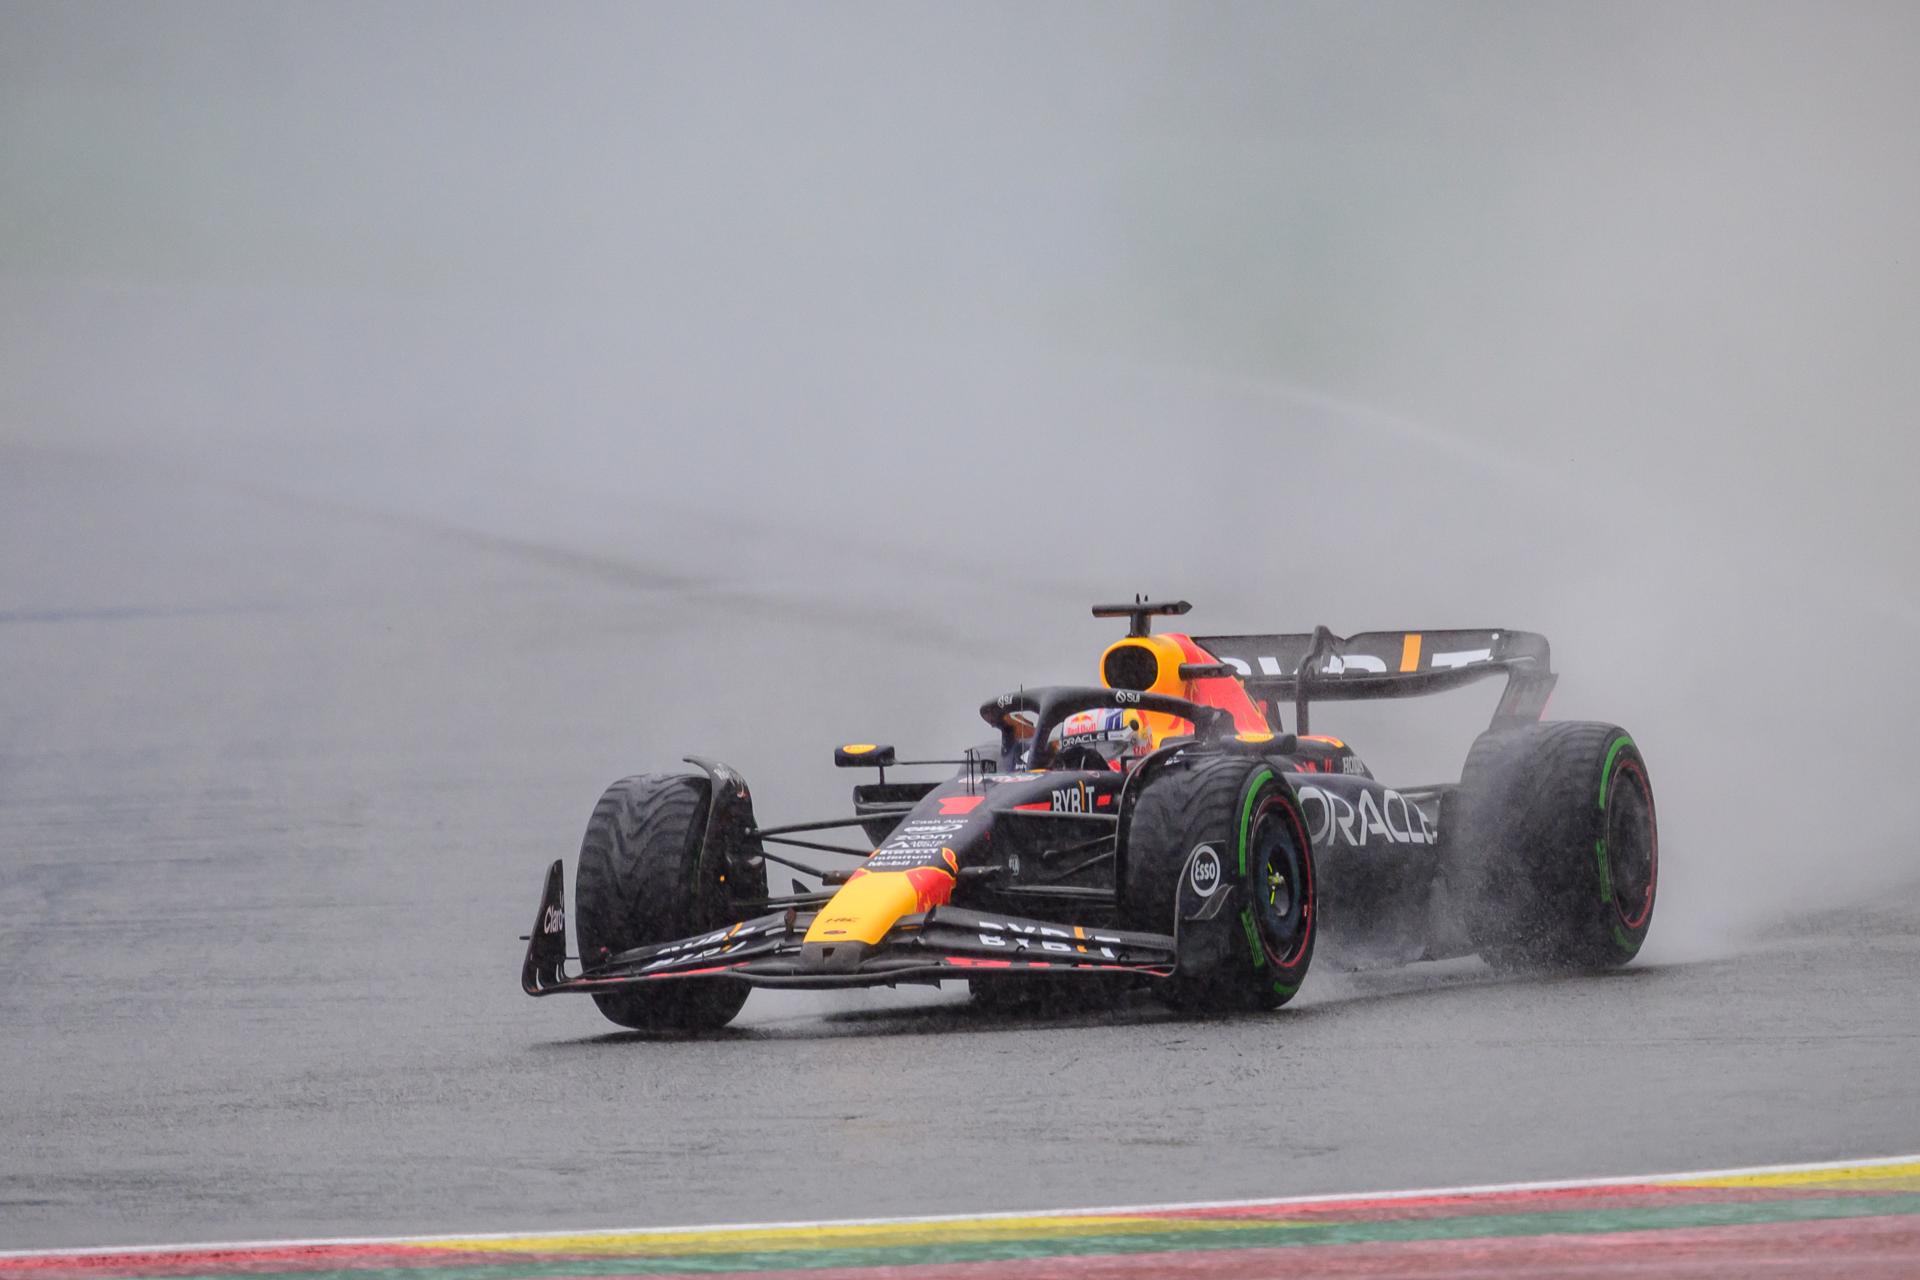 Max Verstappen (Red Bull) takes part in qualifying for the Formula 1 Belgian Grand Prix at the Spa circuit in Stavelot, Belgium, on 28 July 2023. EFE/EPA/CHRISTIAN BRUNA